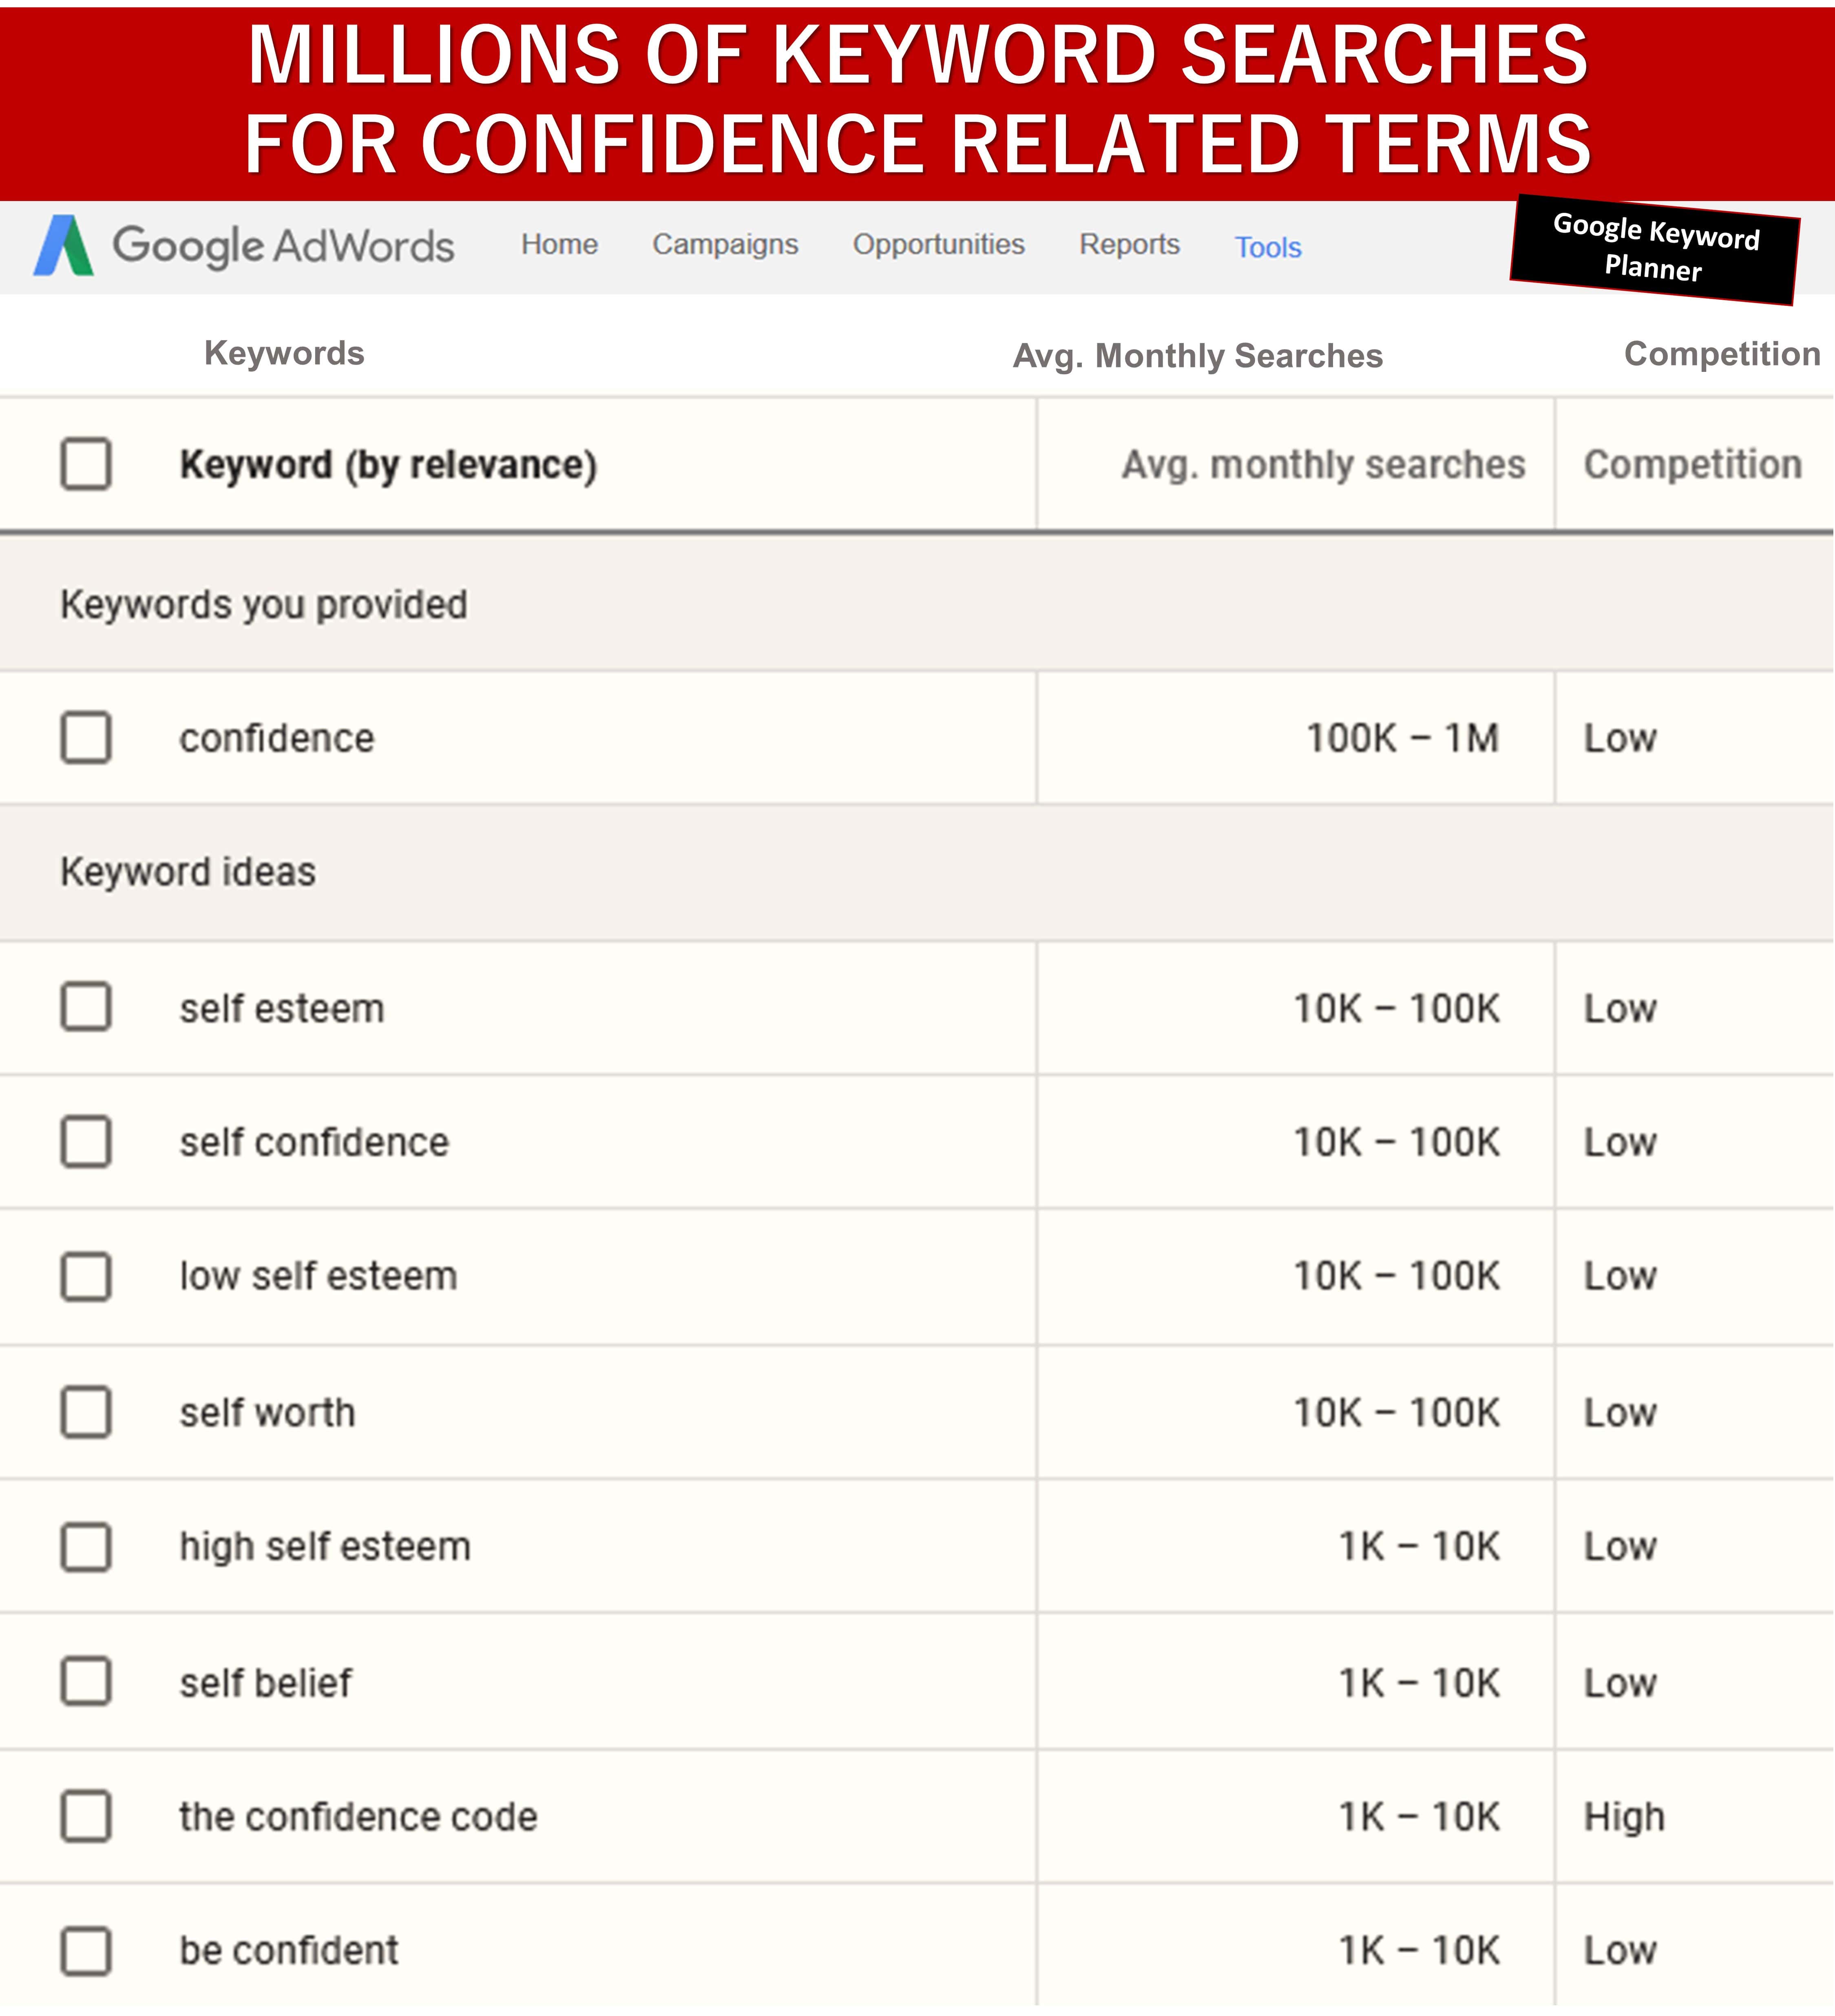 8 Week Ecourse – 8 Types Of Confidence To Excel In Life PLR Rights